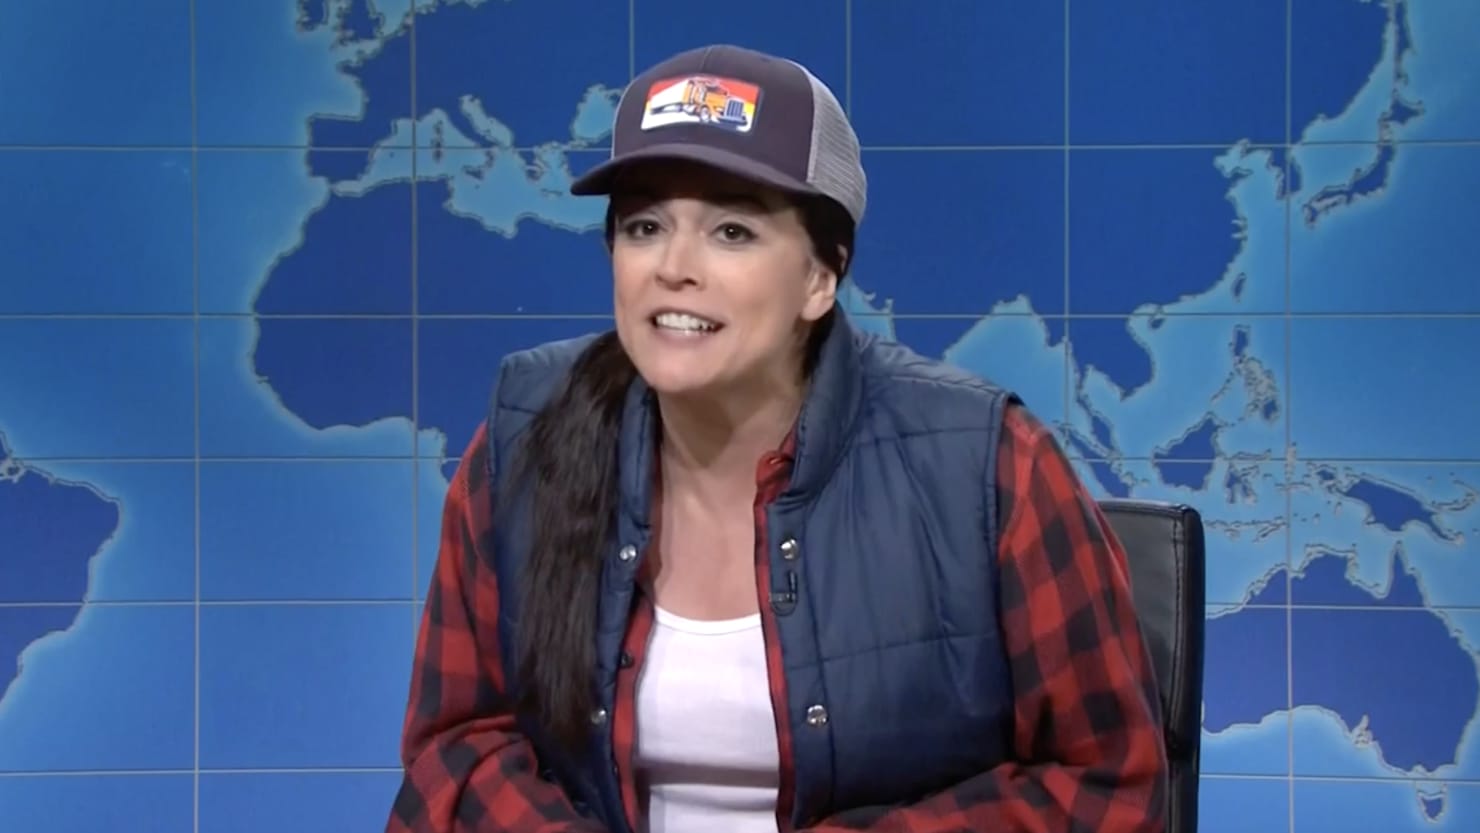 1480px x 833px - On 'SNL,' Cecily Strong Makes Brilliantly Funny Plea for Abortion Rights